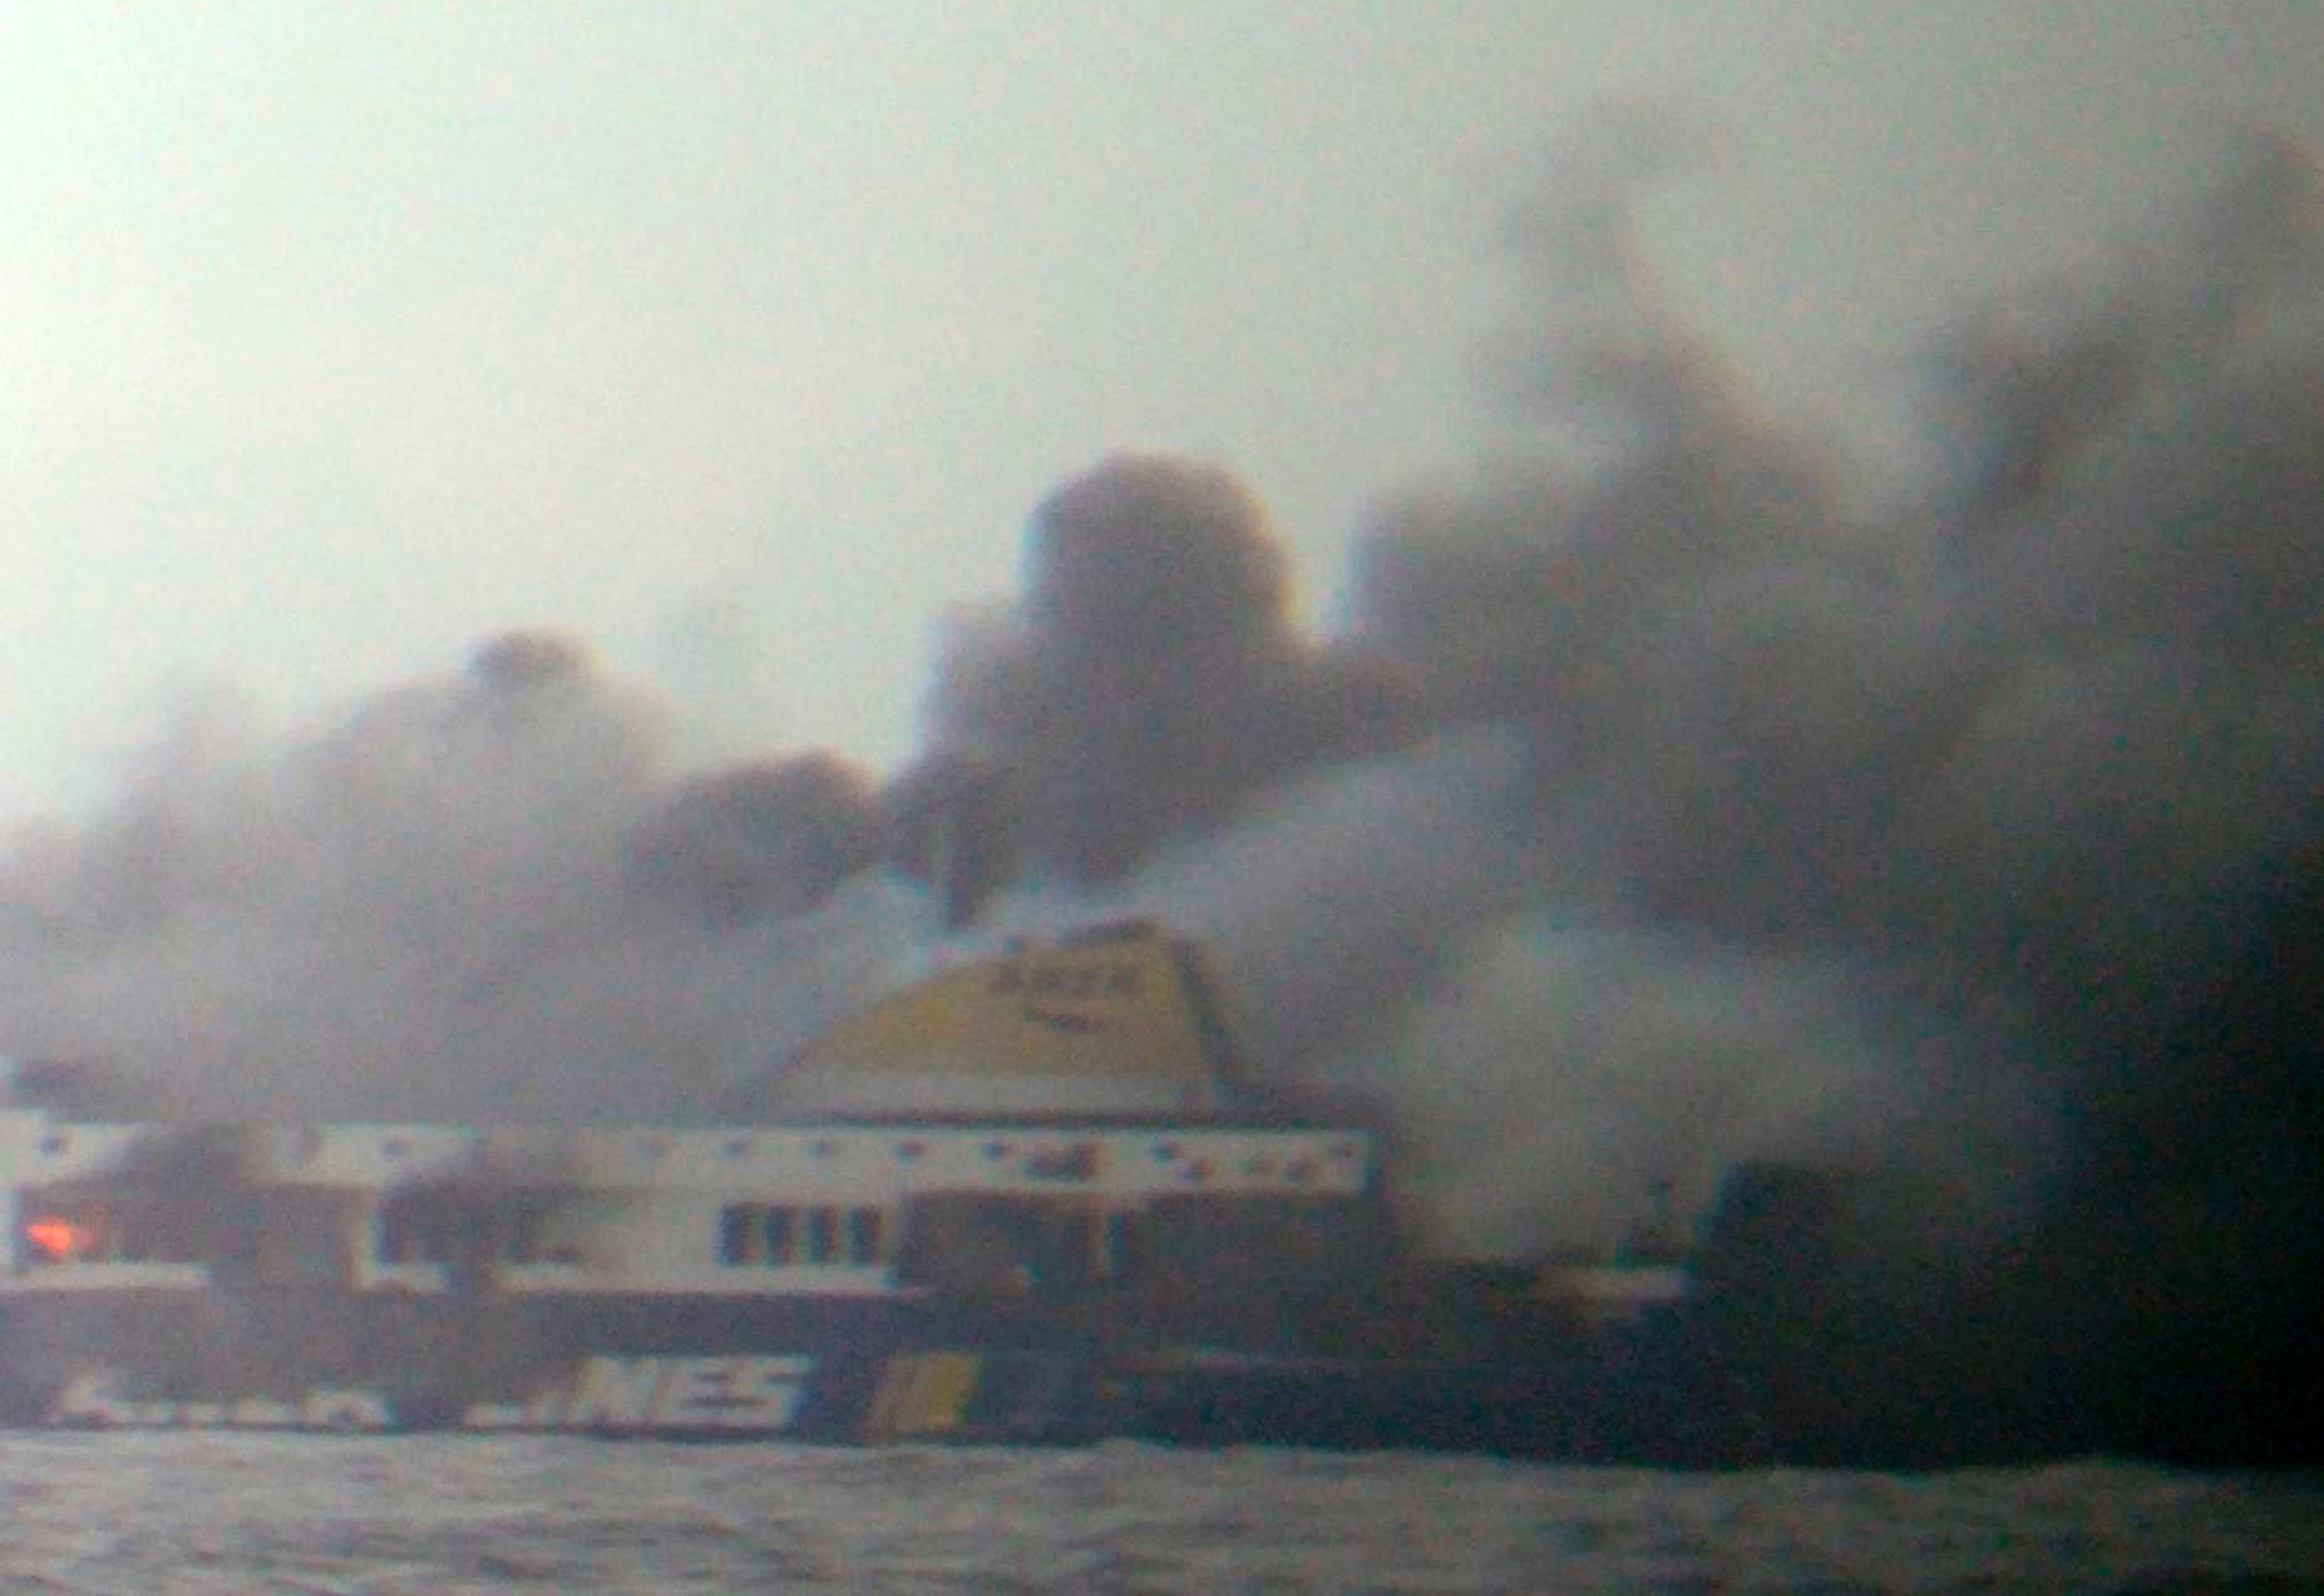 PHOTO: In this photo taken from a nearby ship, smoke rises from the Italian-flagged Norman Atlantic ferry after it caught fire in the Adriatic Sea, Dec. 28, 2014.